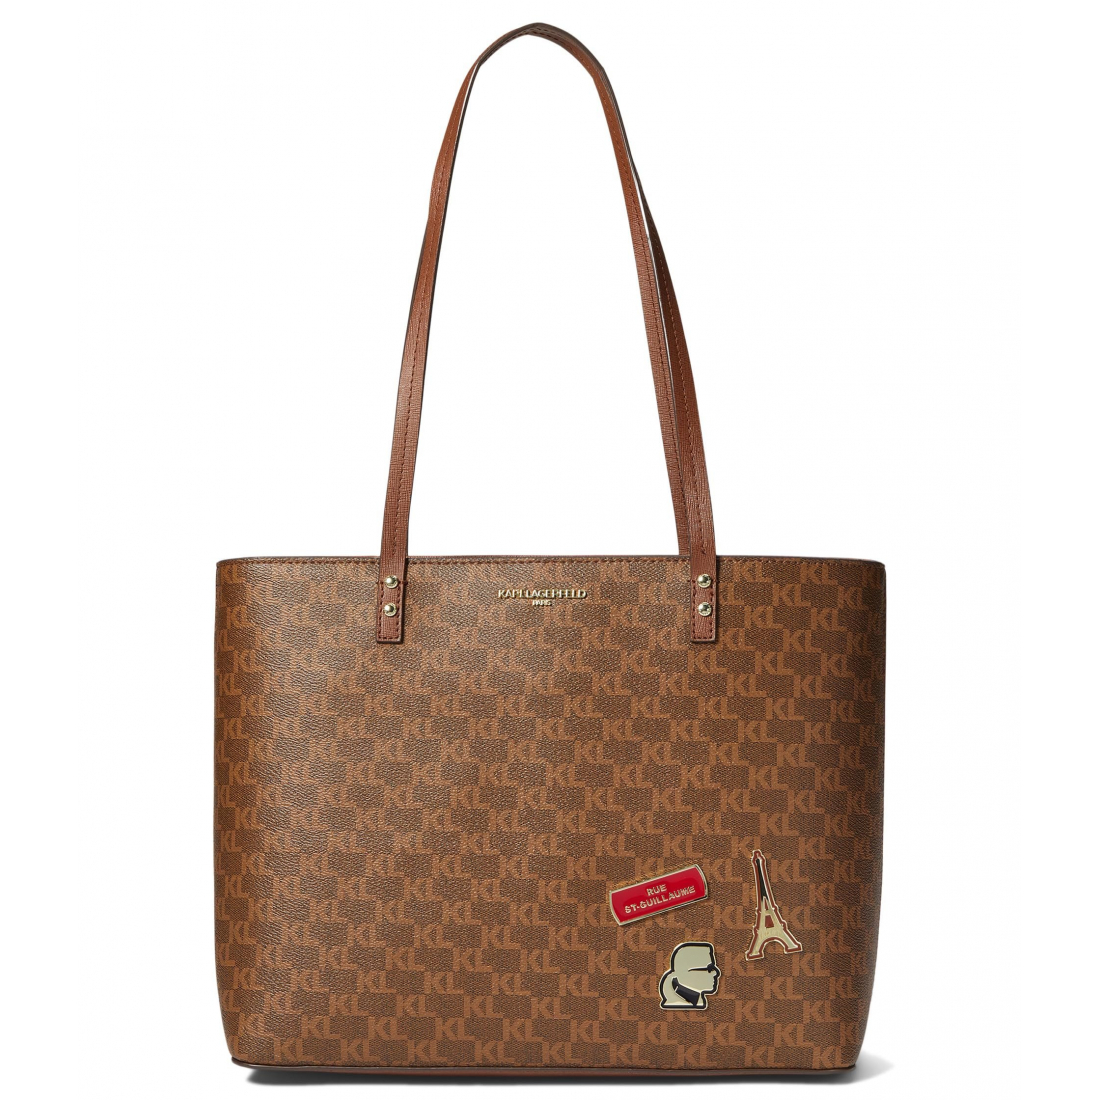 Women's 'Maybelle' Tote Bag